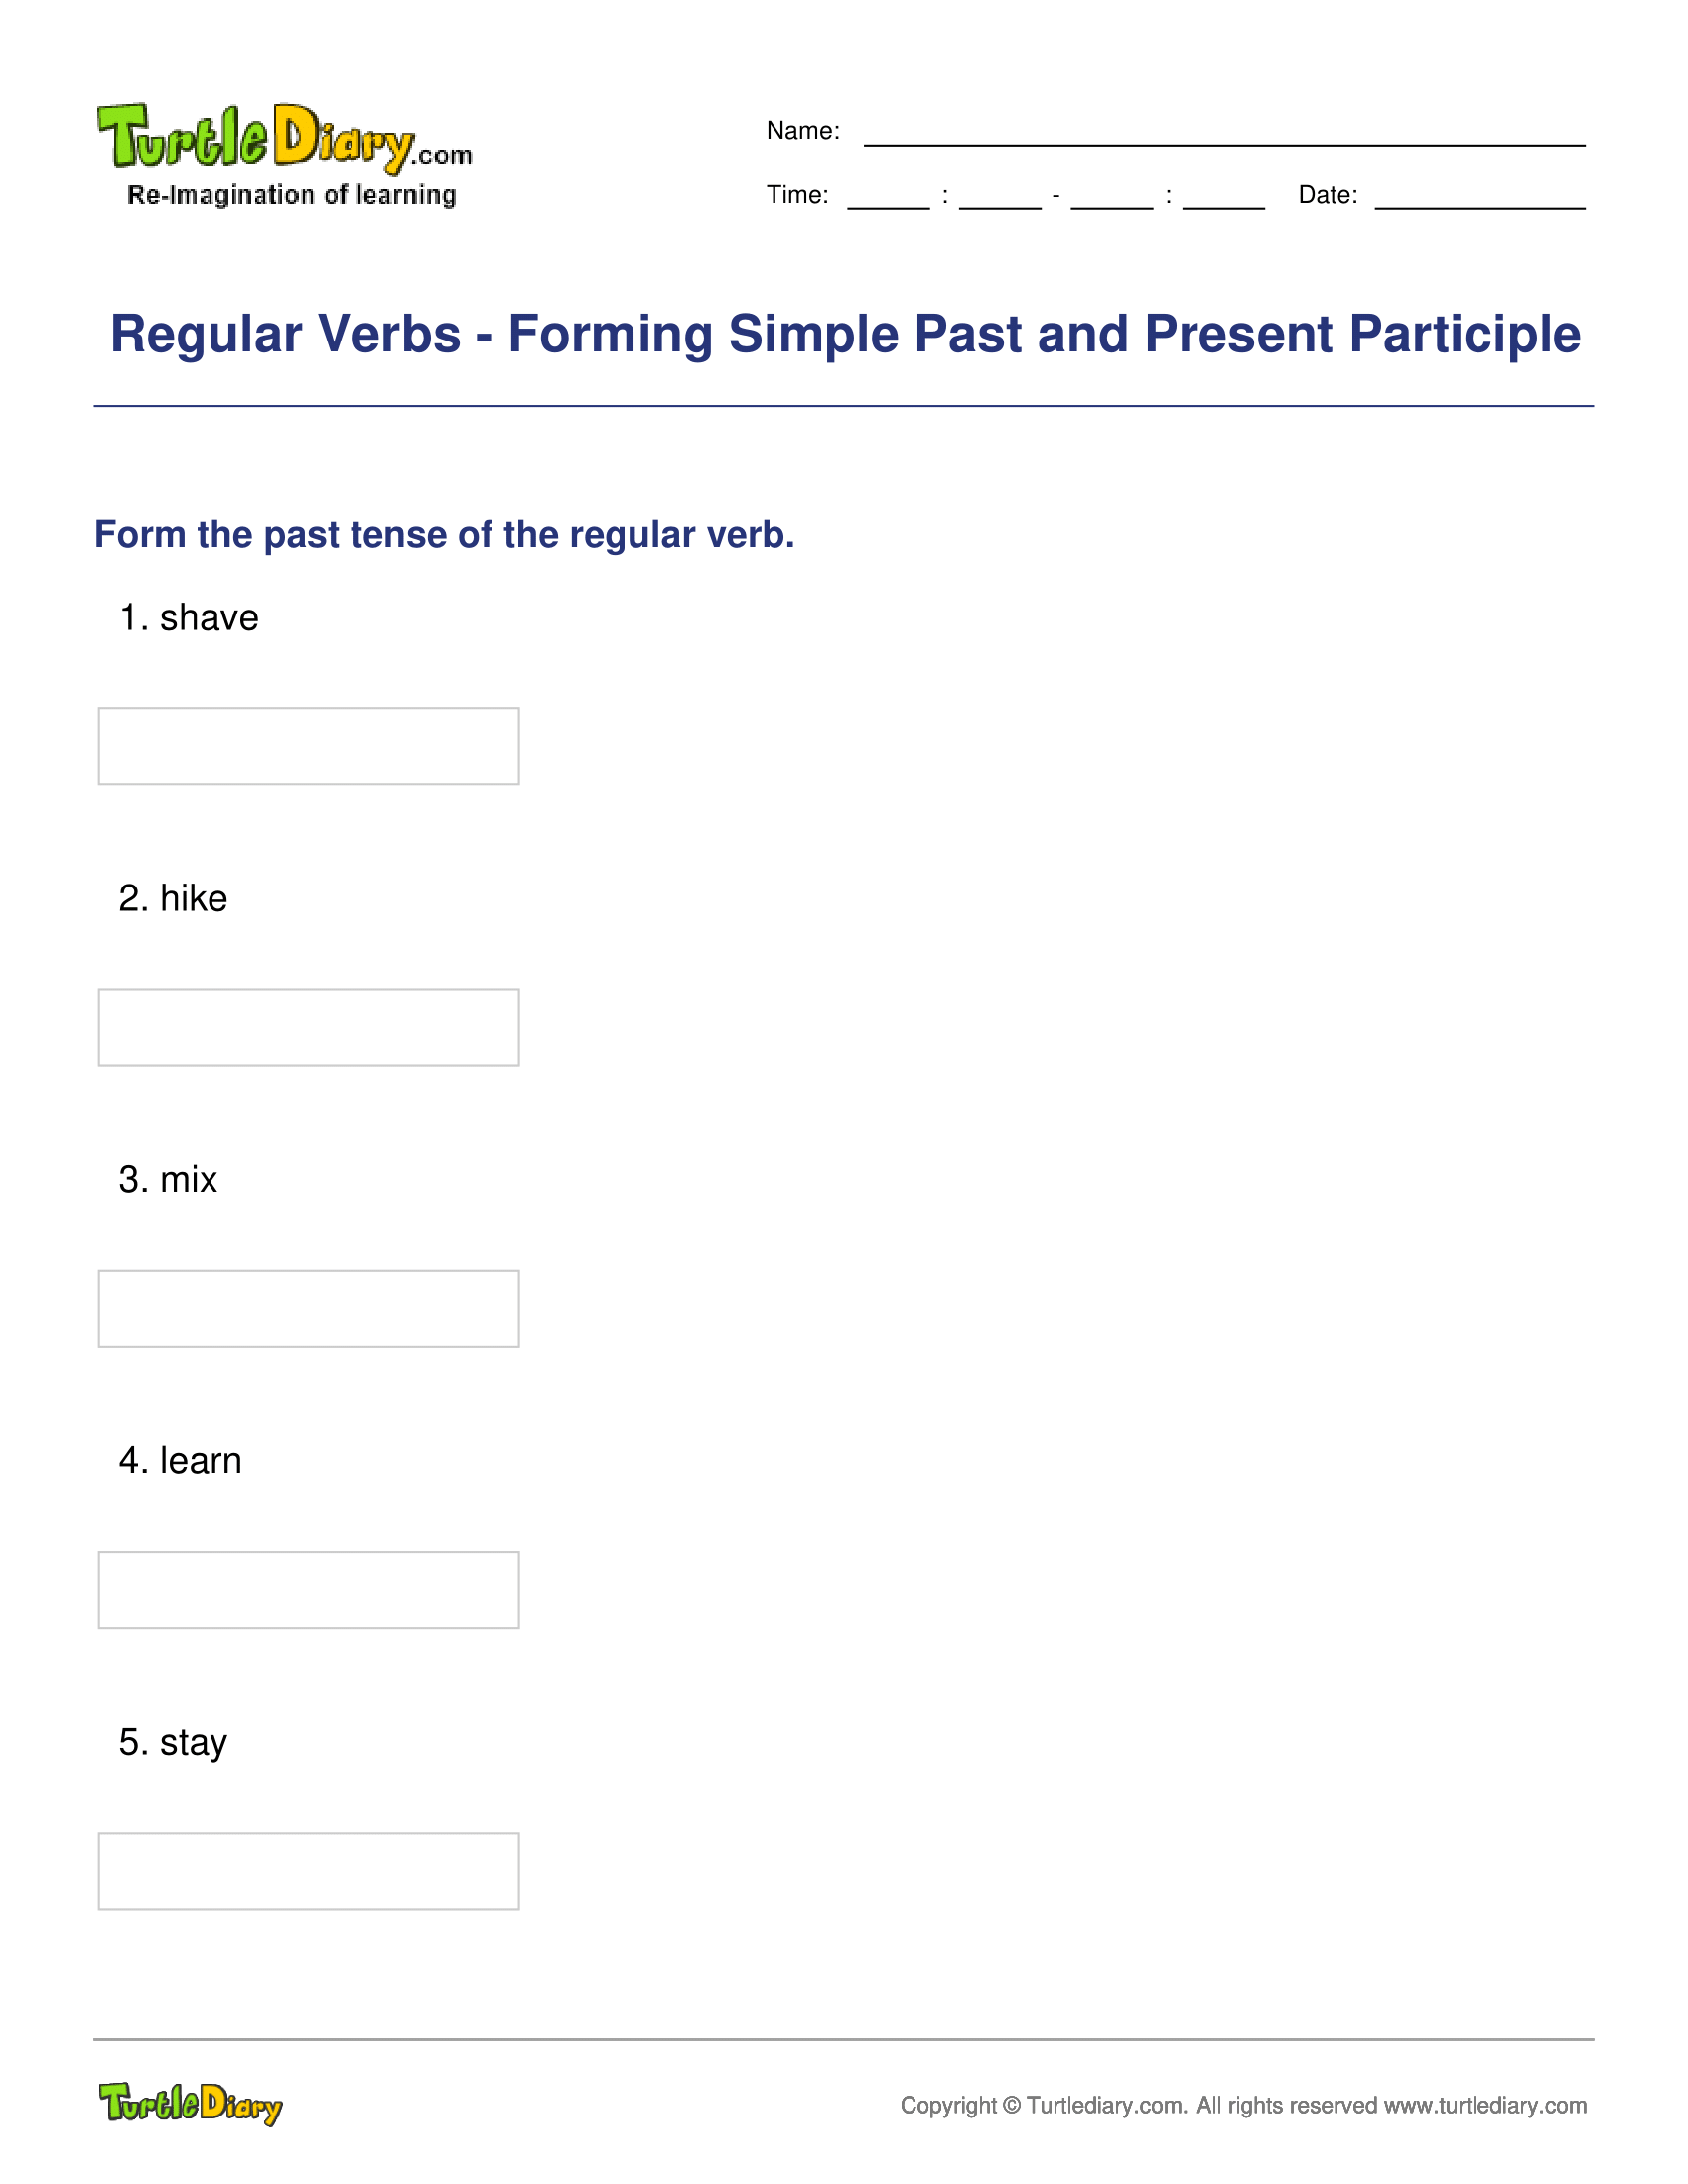 Regular Verbs - Forming Simple Past and Present Participle